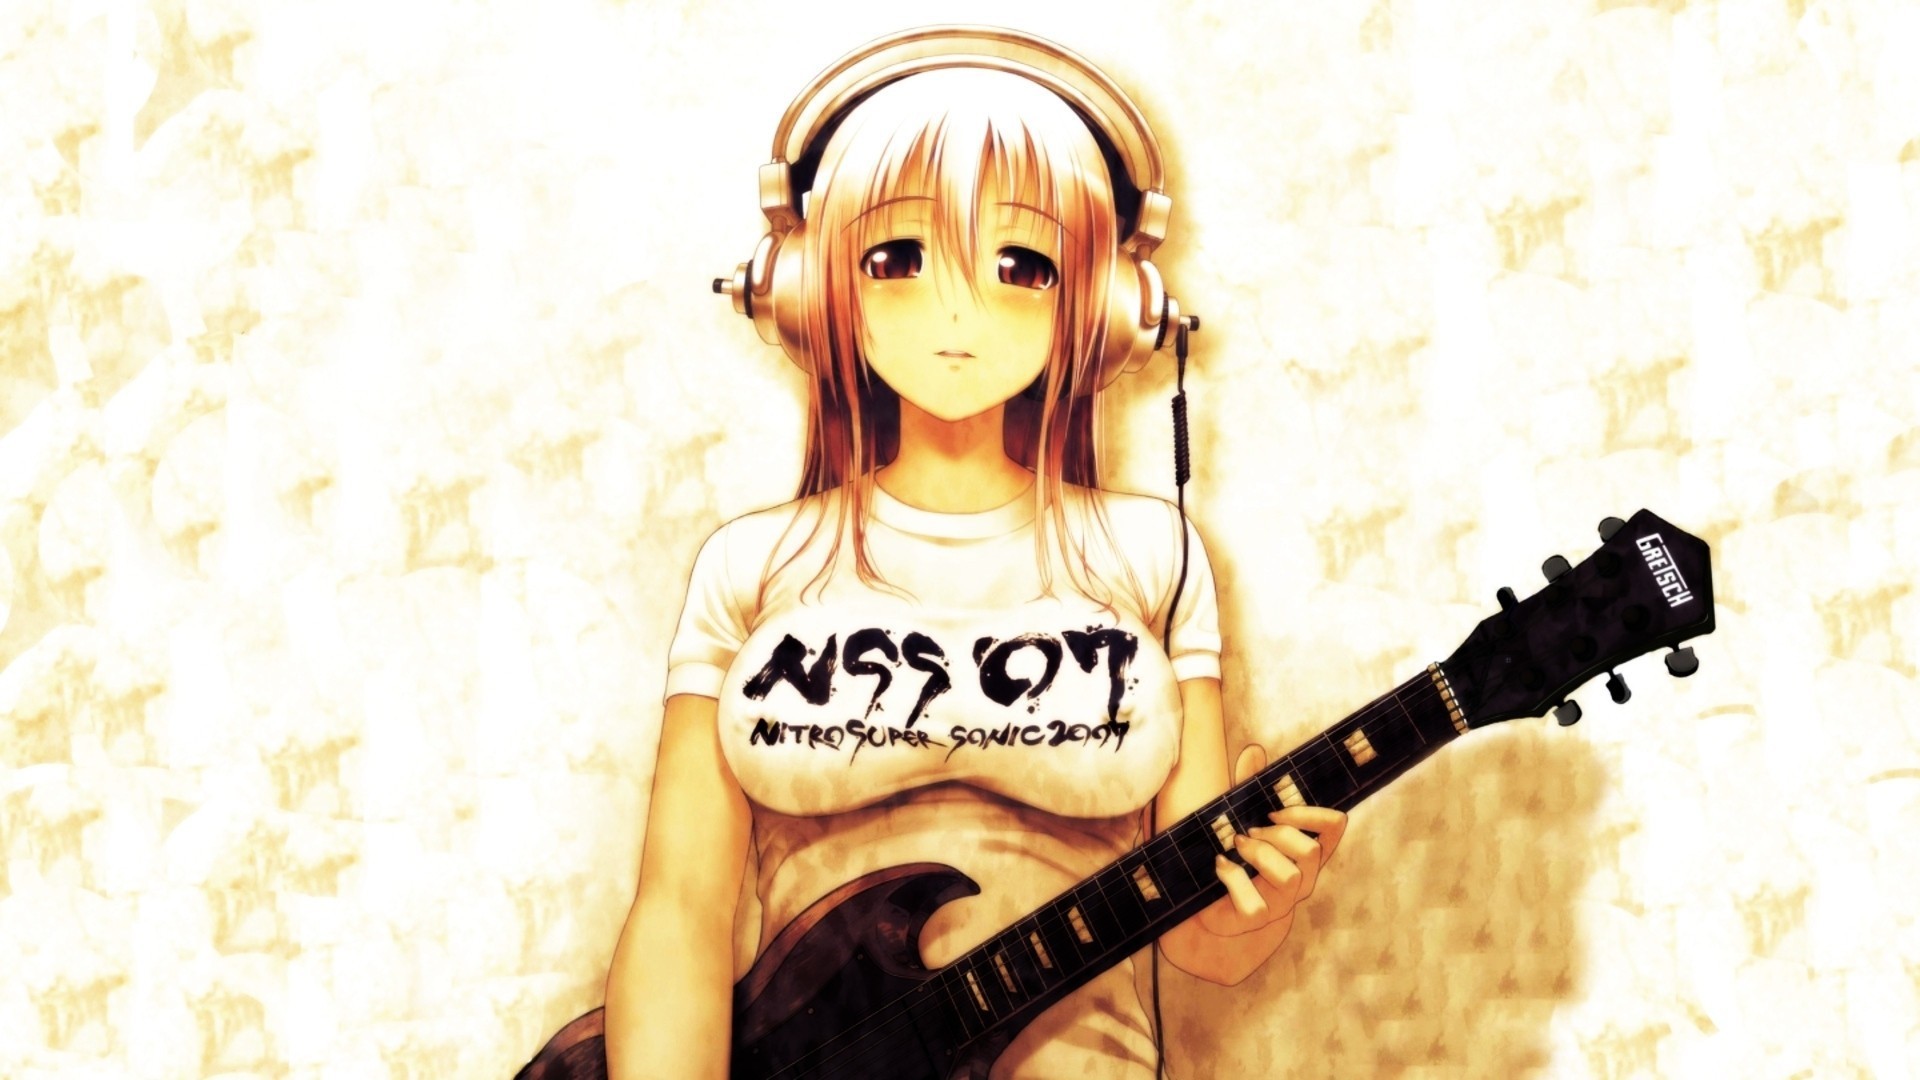 1920x1080 Super Sonic, Anime girl with guitar wallpapers and images - wallpapers,  pictures, photos